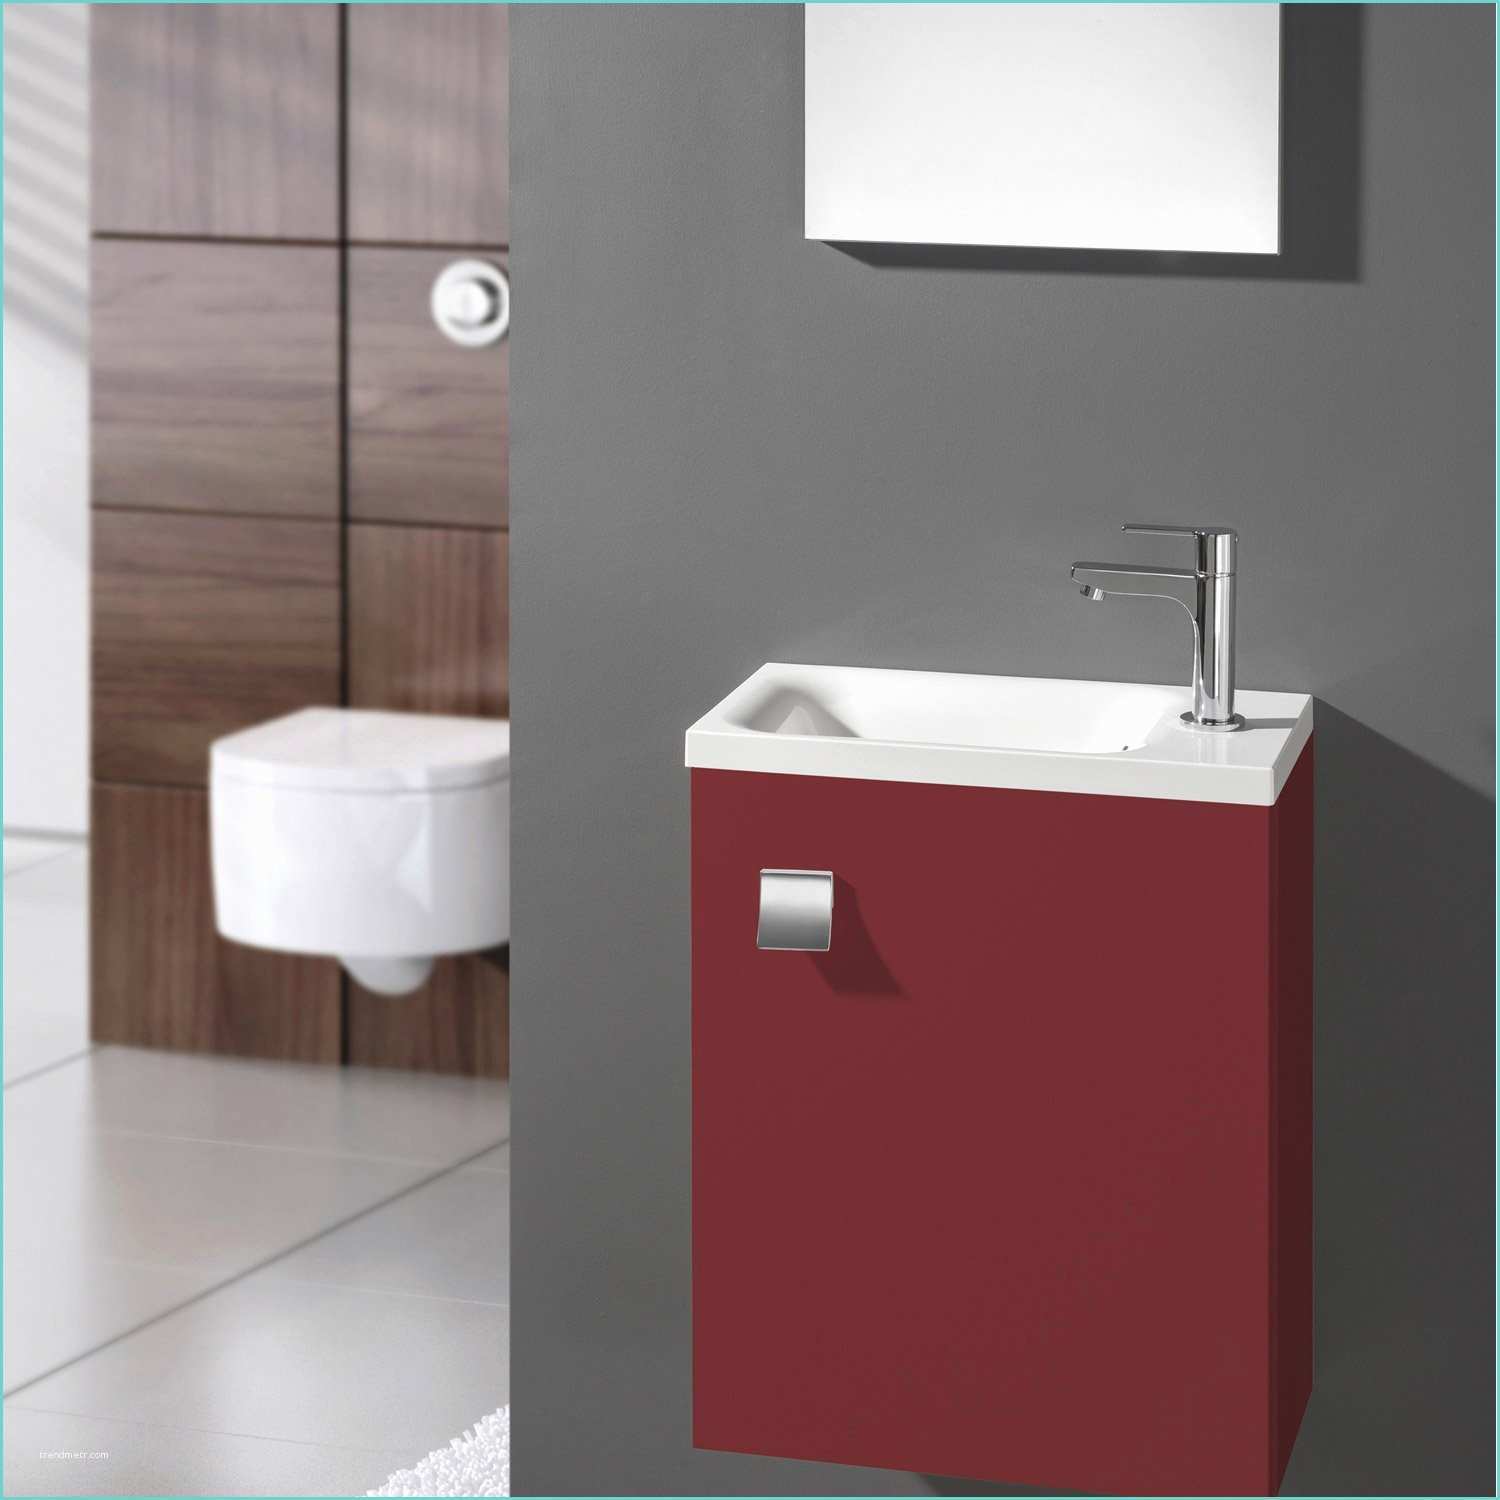 Lave Main Credence Leroy Merlin Meuble Lave Mains Avec Miroir Rouge Rouge N°3 Coin D O